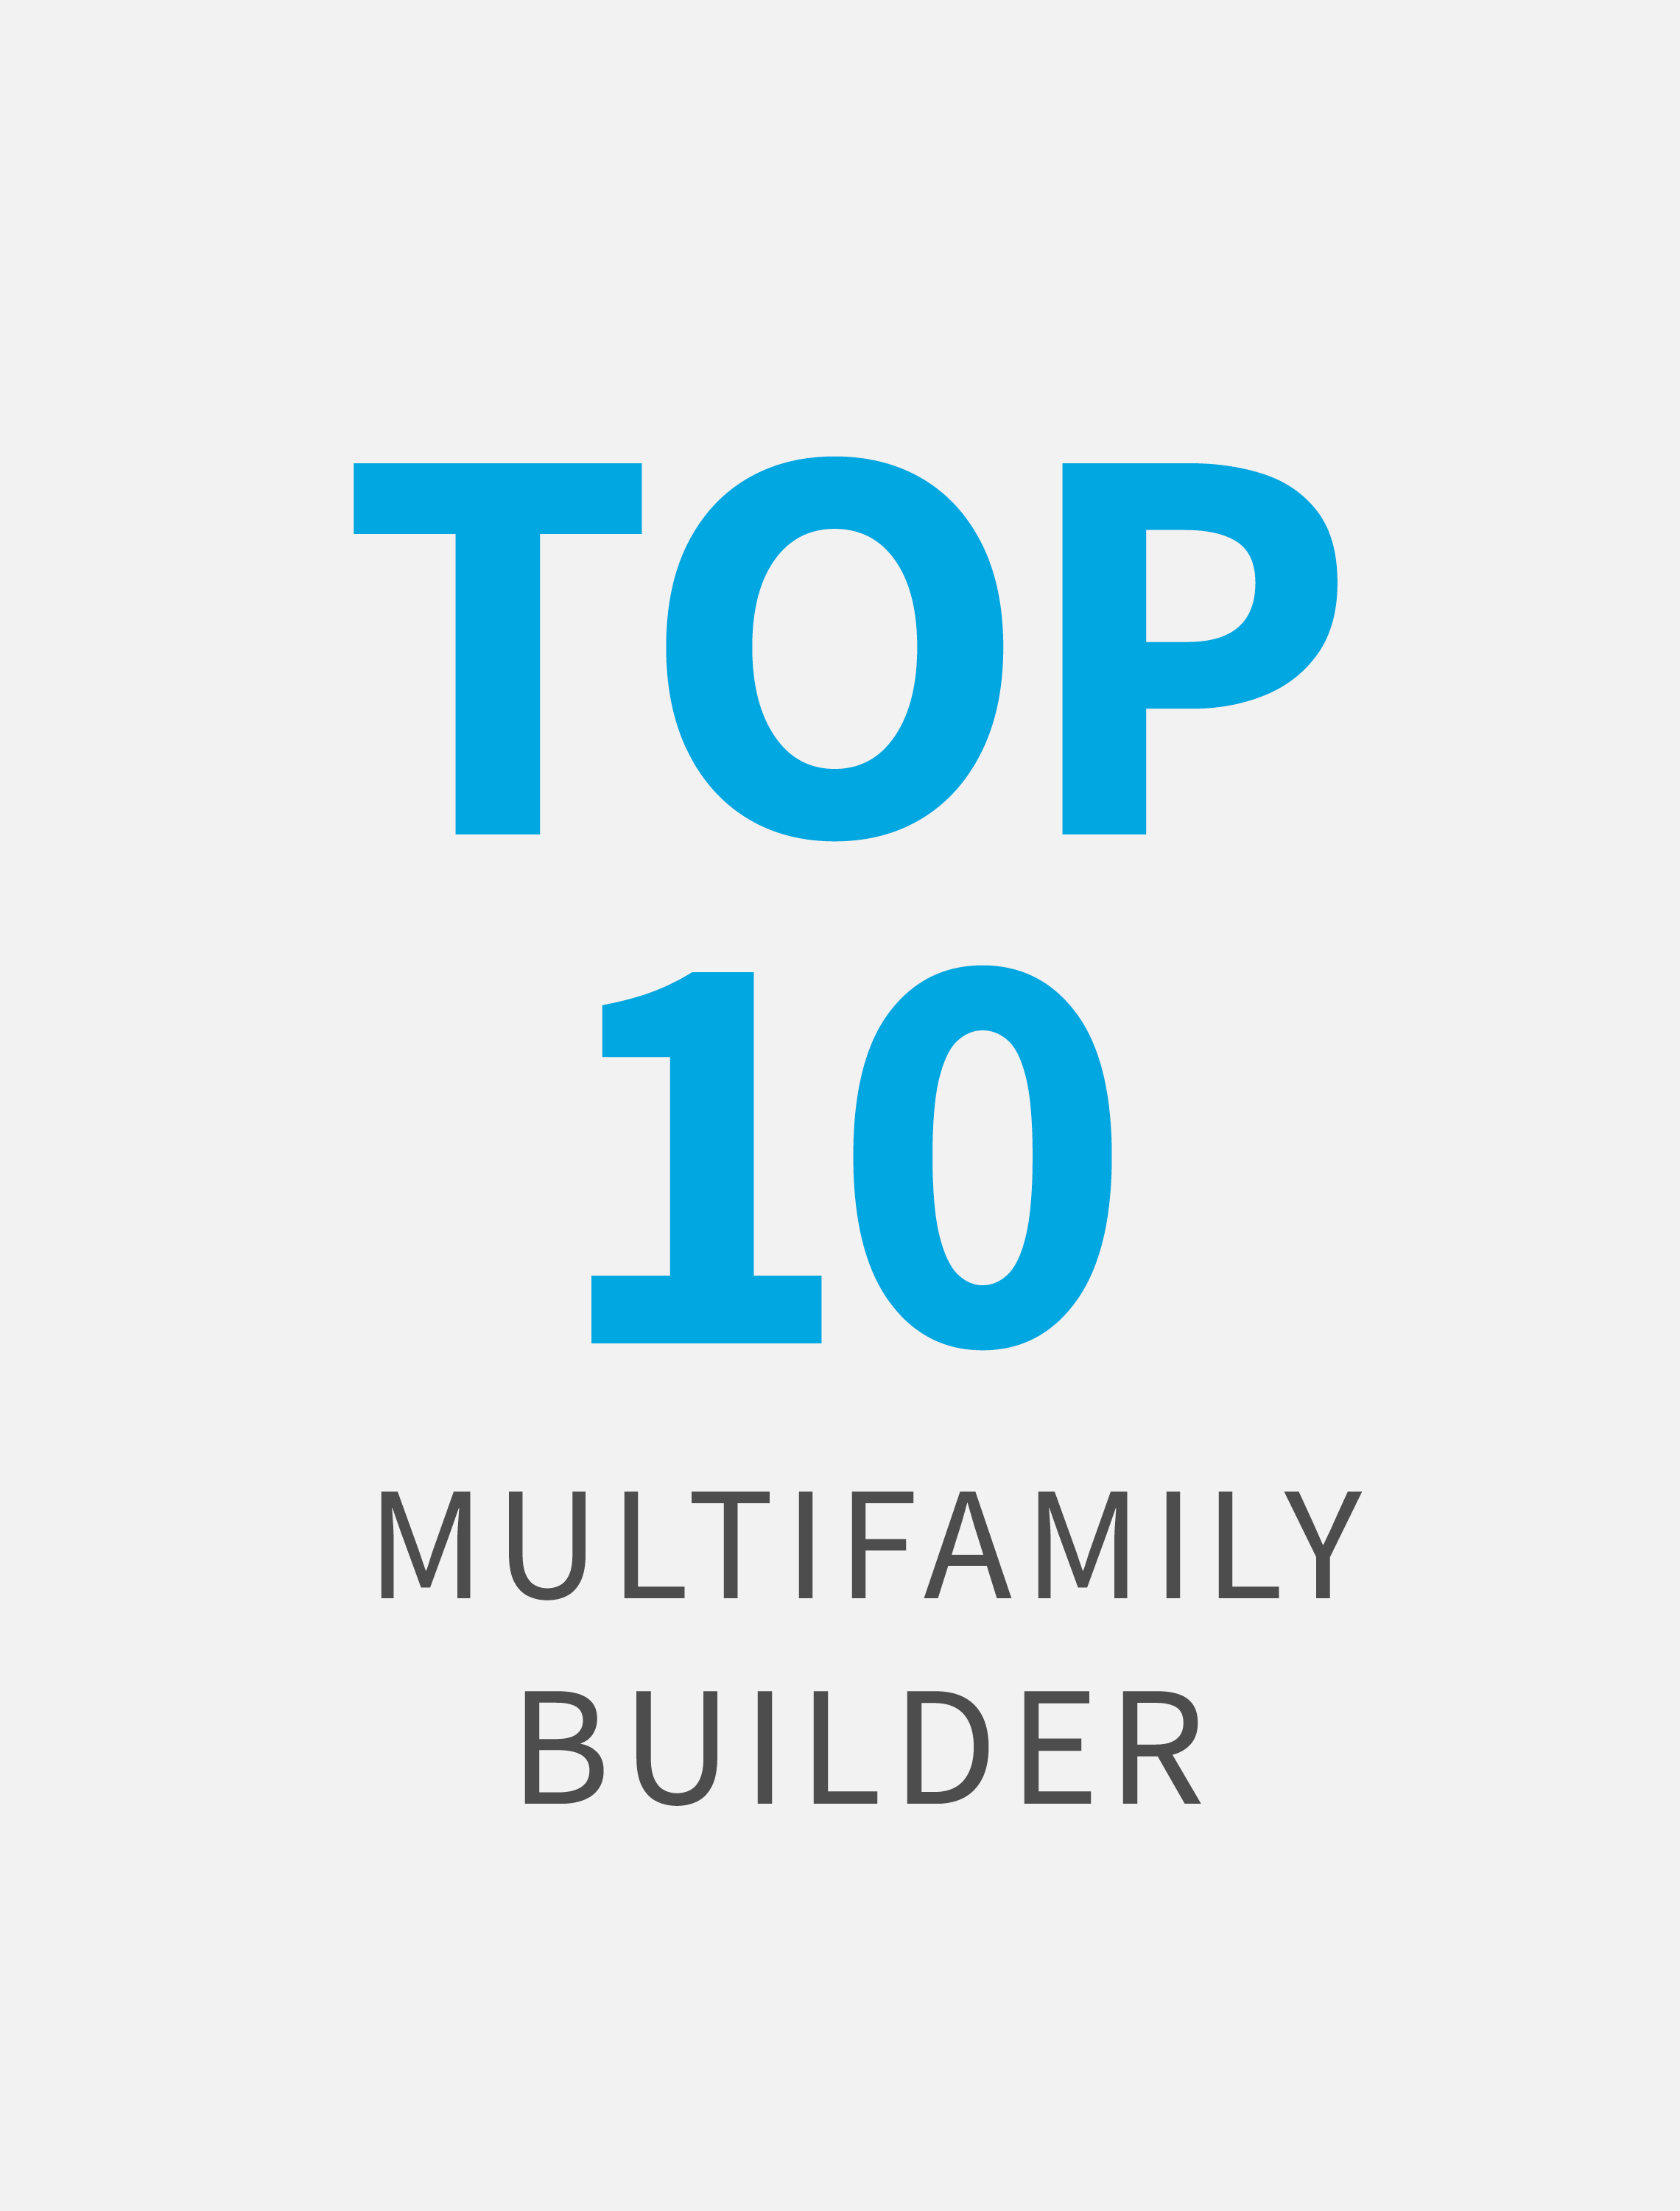 CBG is one of the top ten multifamily builders in the country